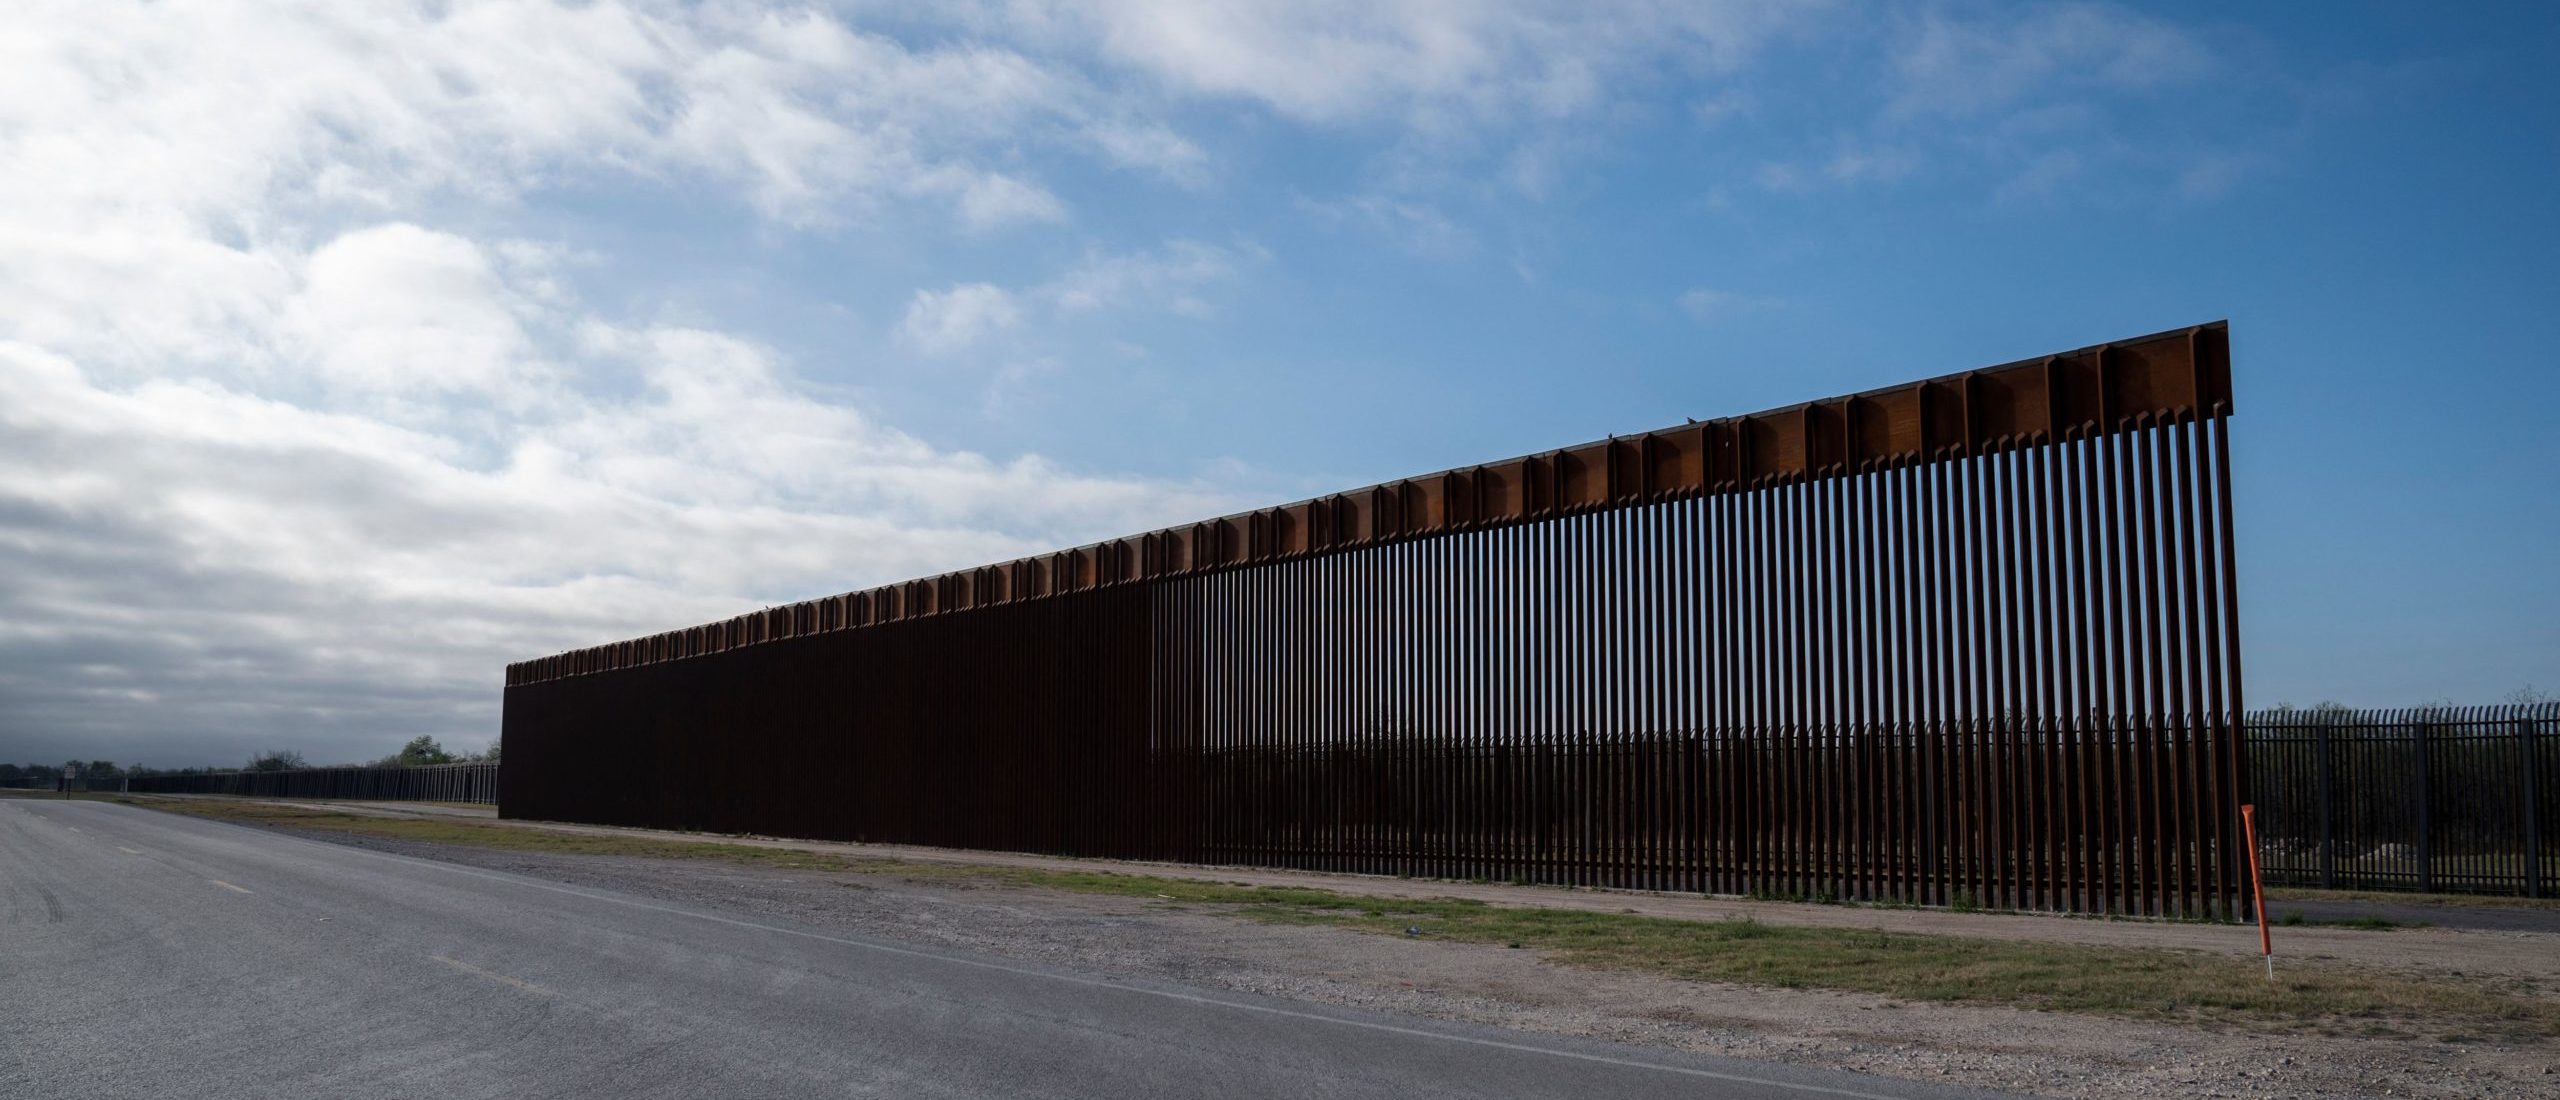 TOPSHOT - A segment of the new border wall is seen in front of the older border wall in Del Rio, Texas on March 5, 2023. (Photo by VERONICA G. CARDENAS / AFP) (Photo by VERONICA G. CARDENAS/AFP via Getty Images)